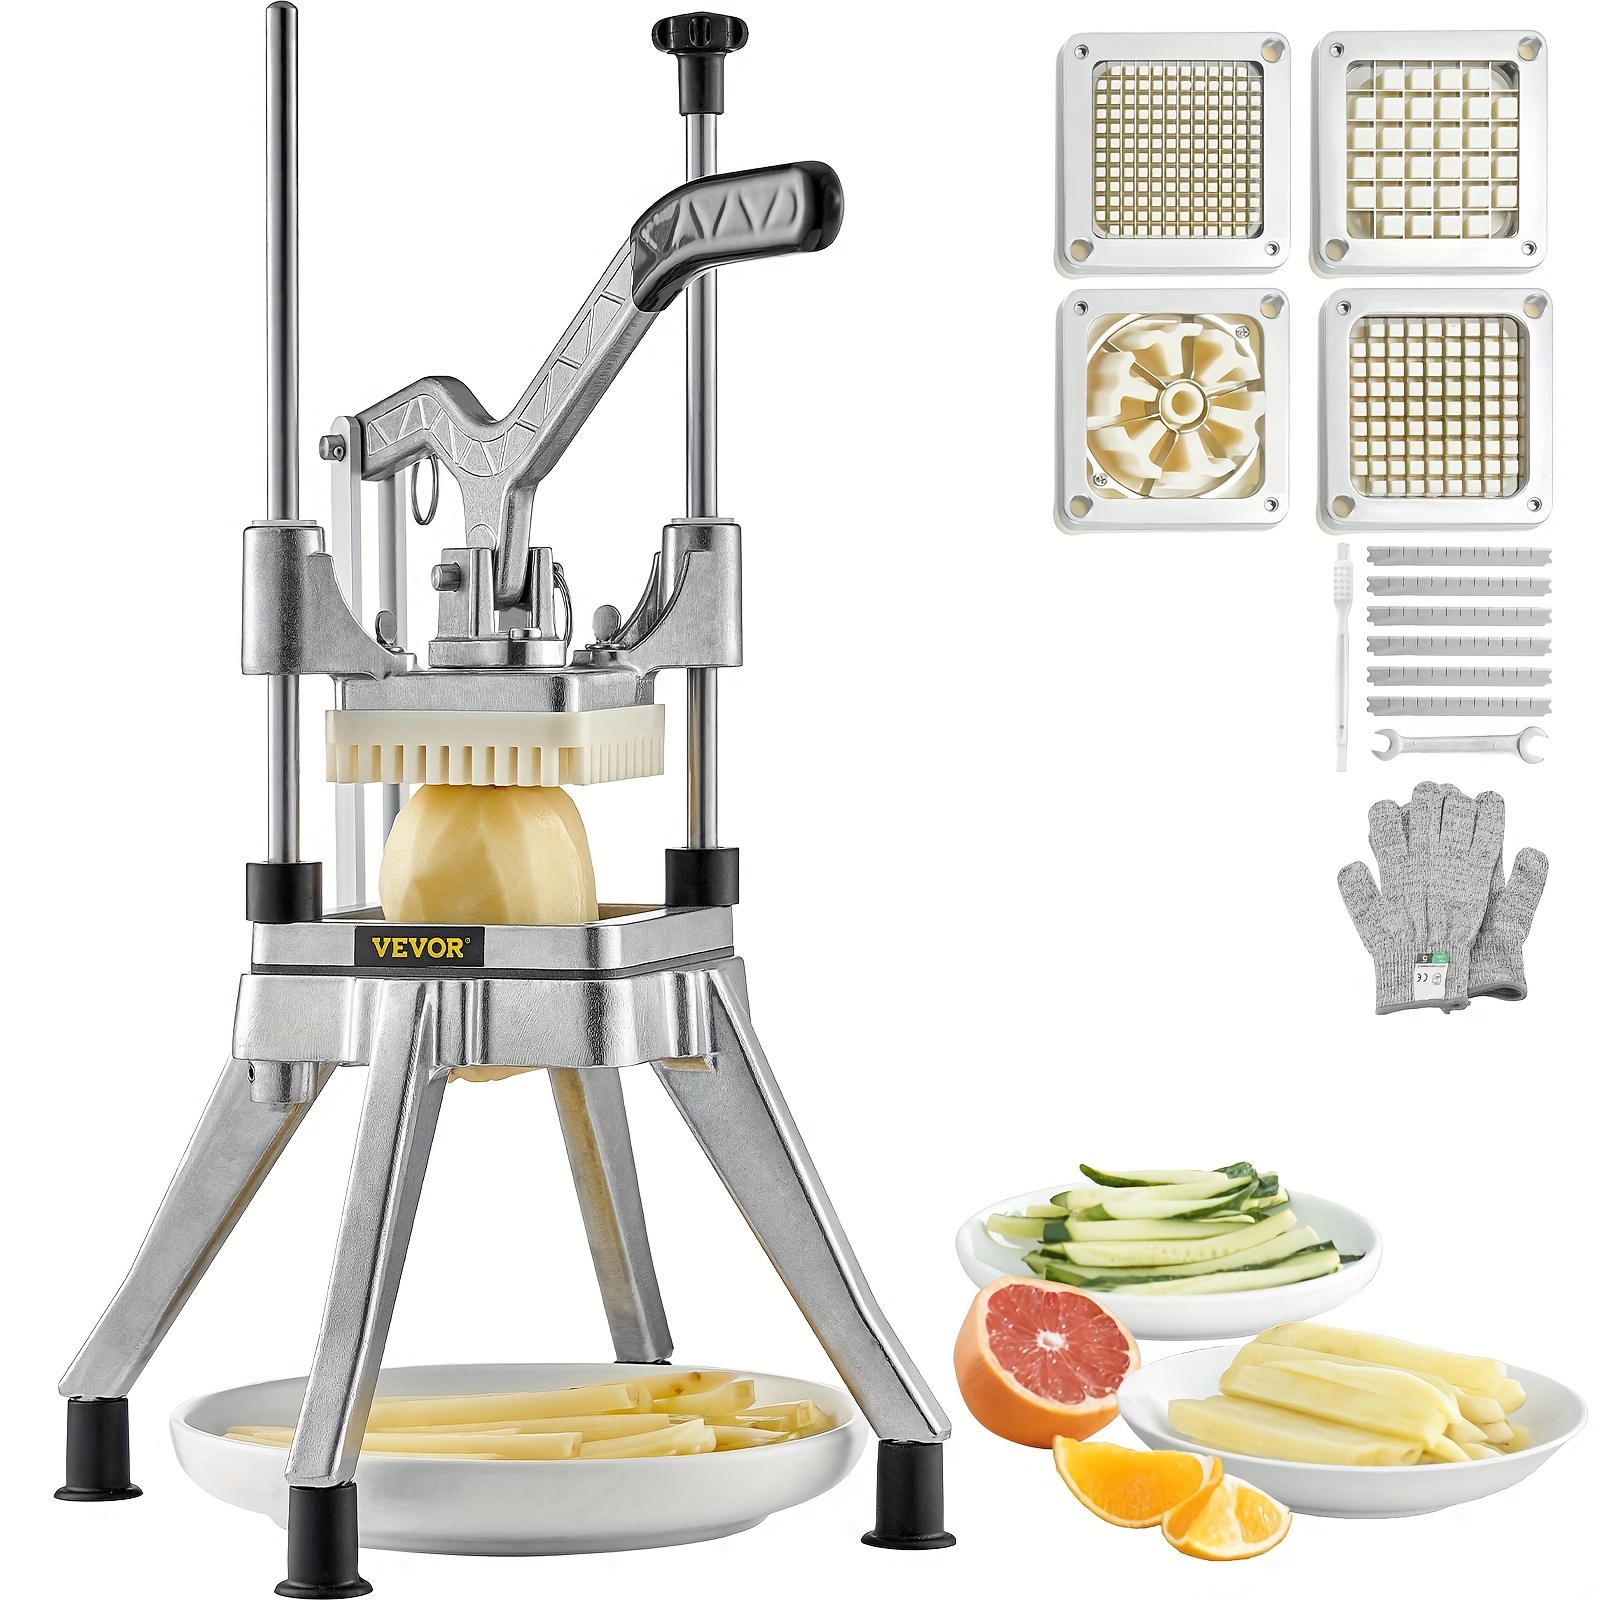 

Commercial Chopper Commercial Vegetable Chopper With 4 Blades Fruits Dicer